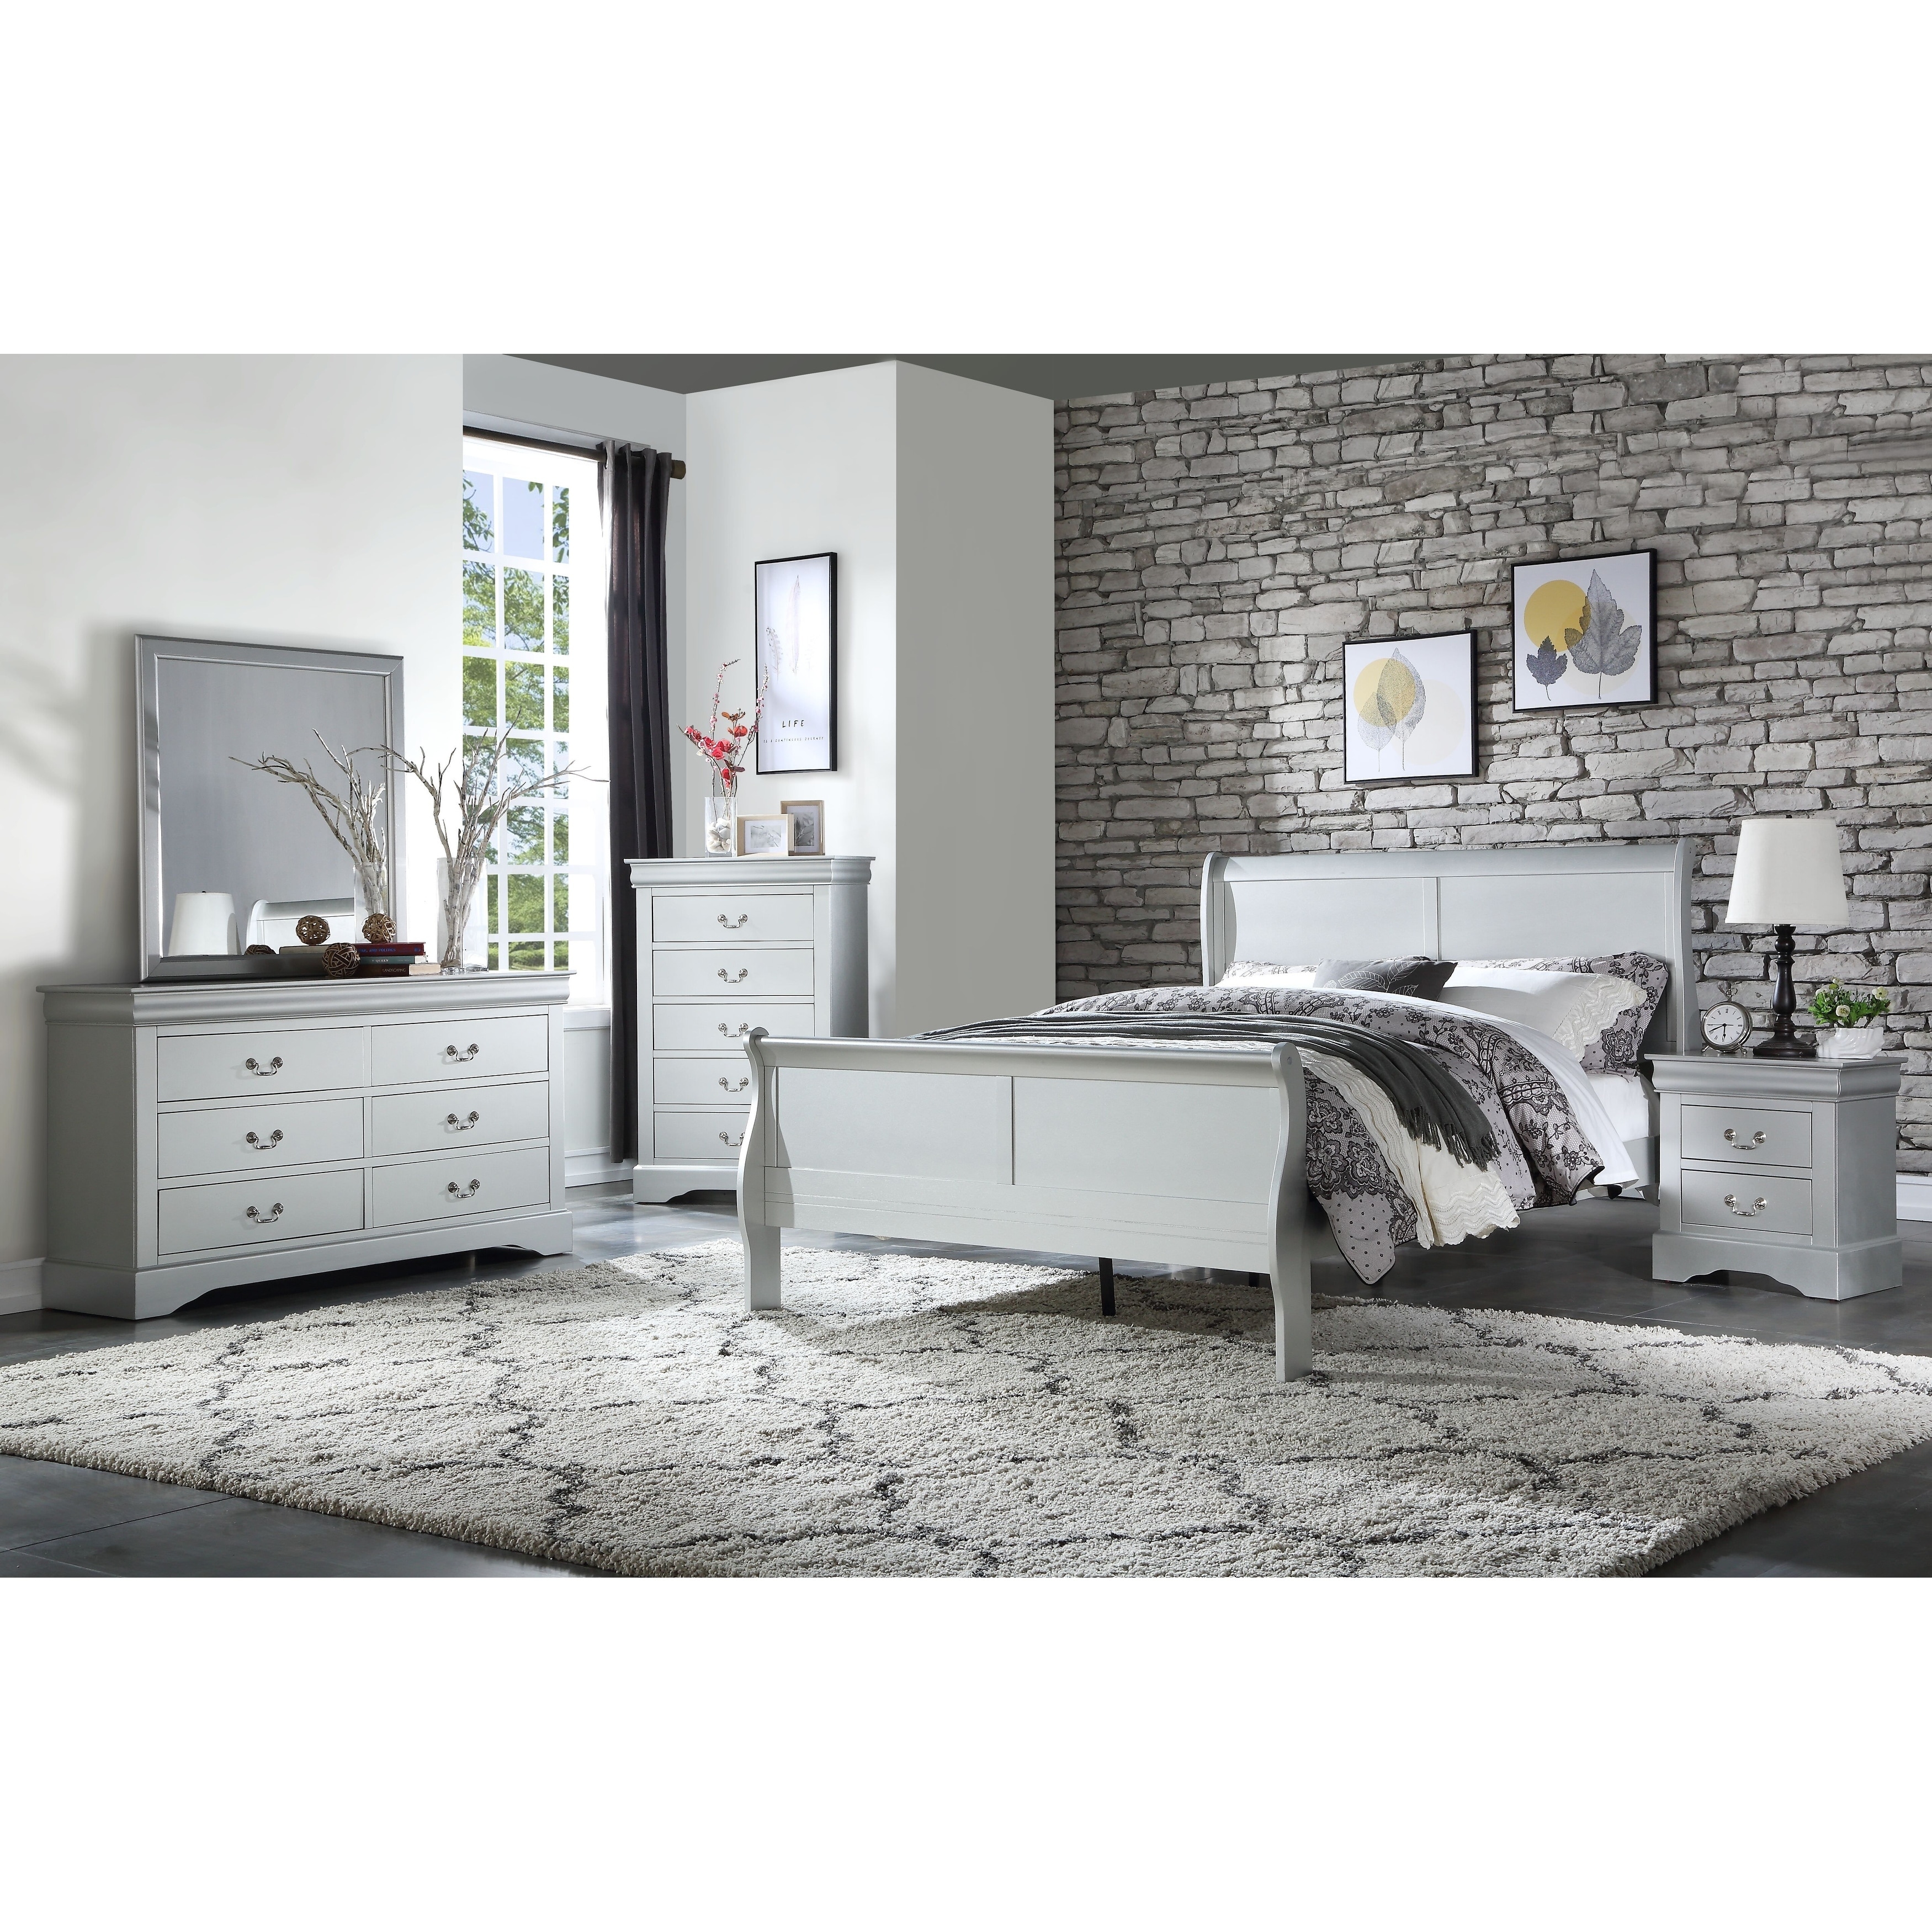 ACME Louis Philippe Twin Bed in Platinum - Bed Bath & Beyond - 24031986